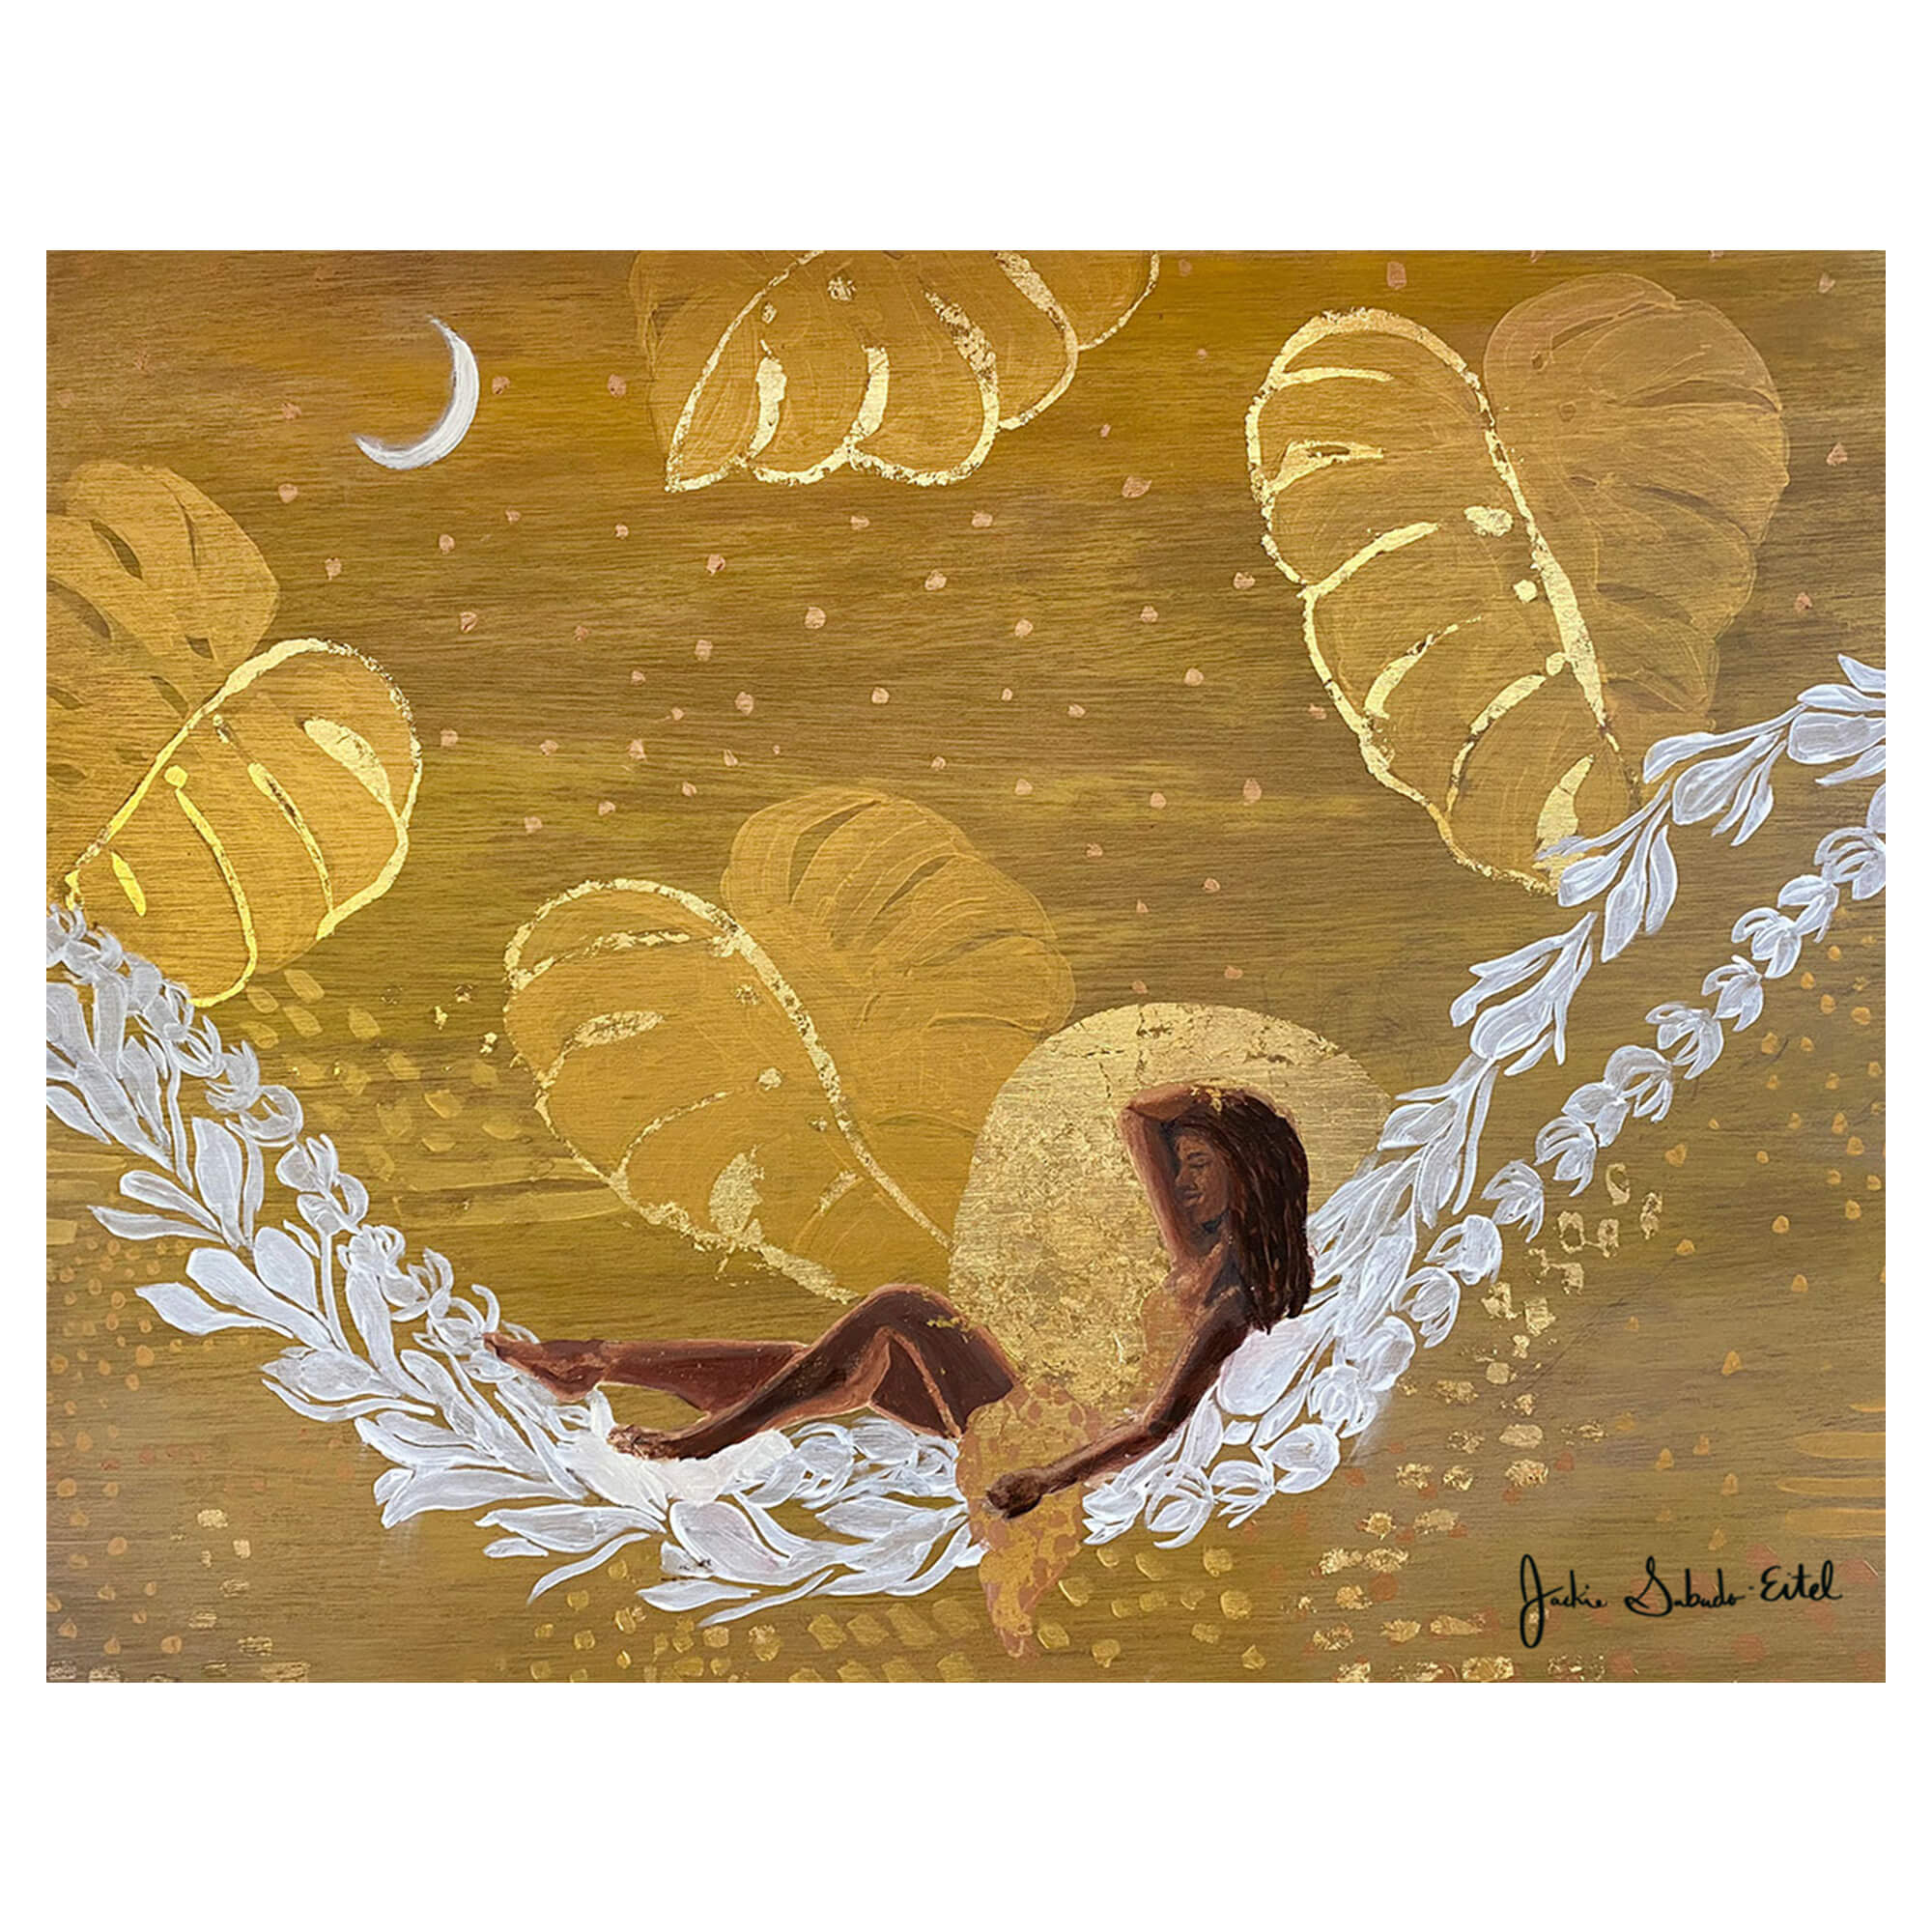 A matted art print featuring a woman relaxing on a lei hammock with monstera leaves backdrop and some gold touchups by Hawaii artist Jackie Eitel